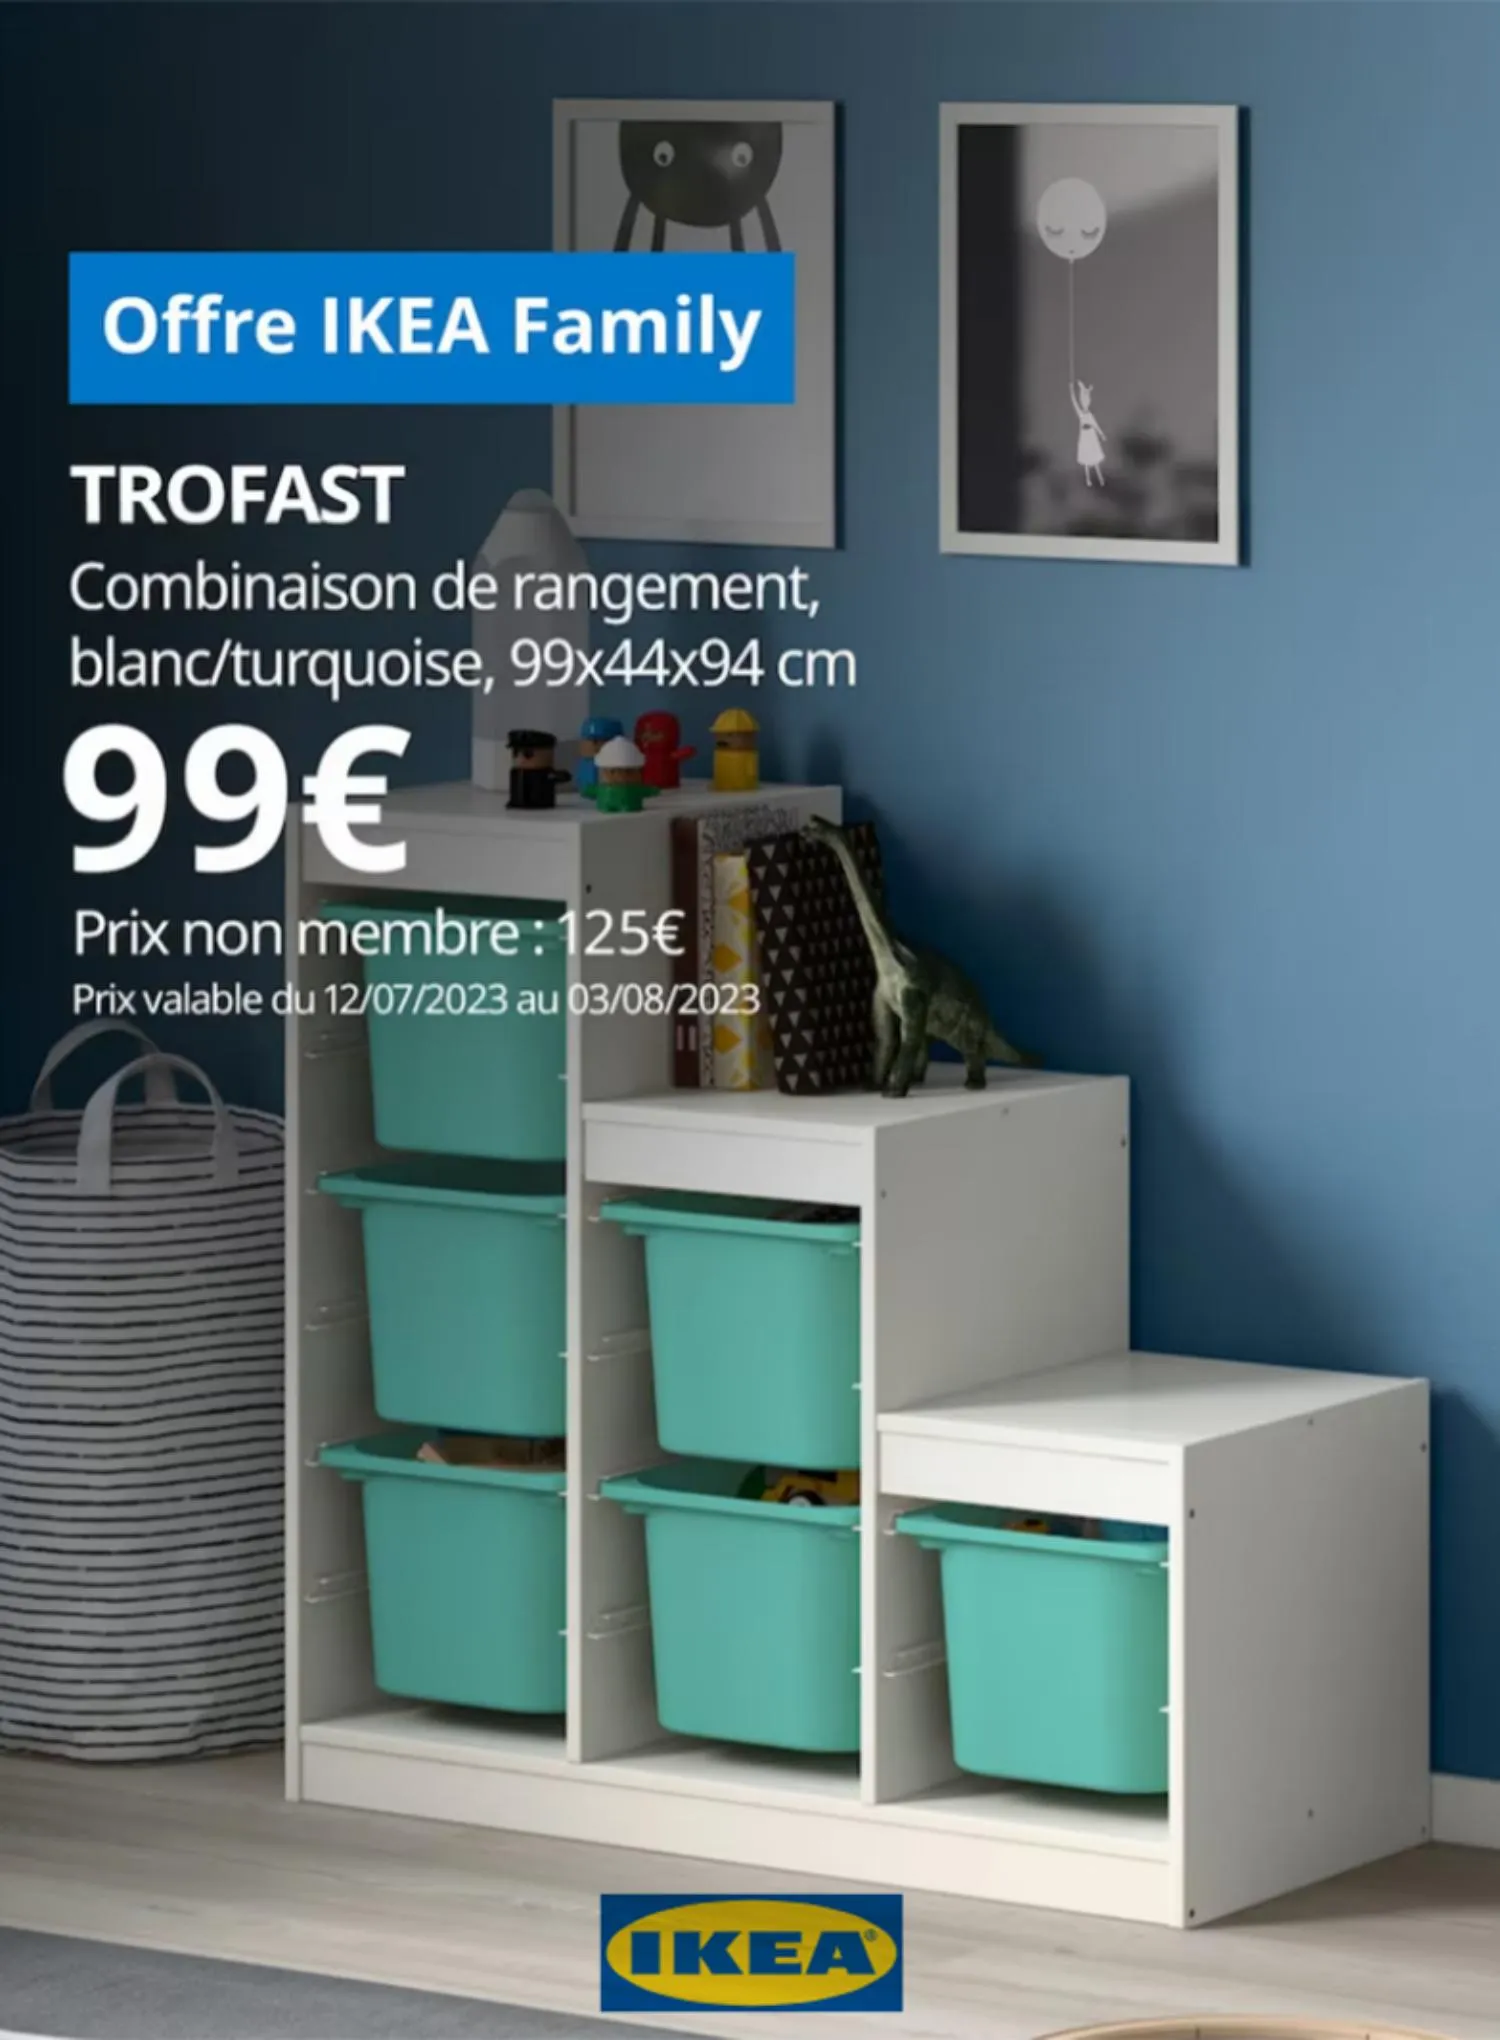 Catalogue Offre IKEA Family, page 00001